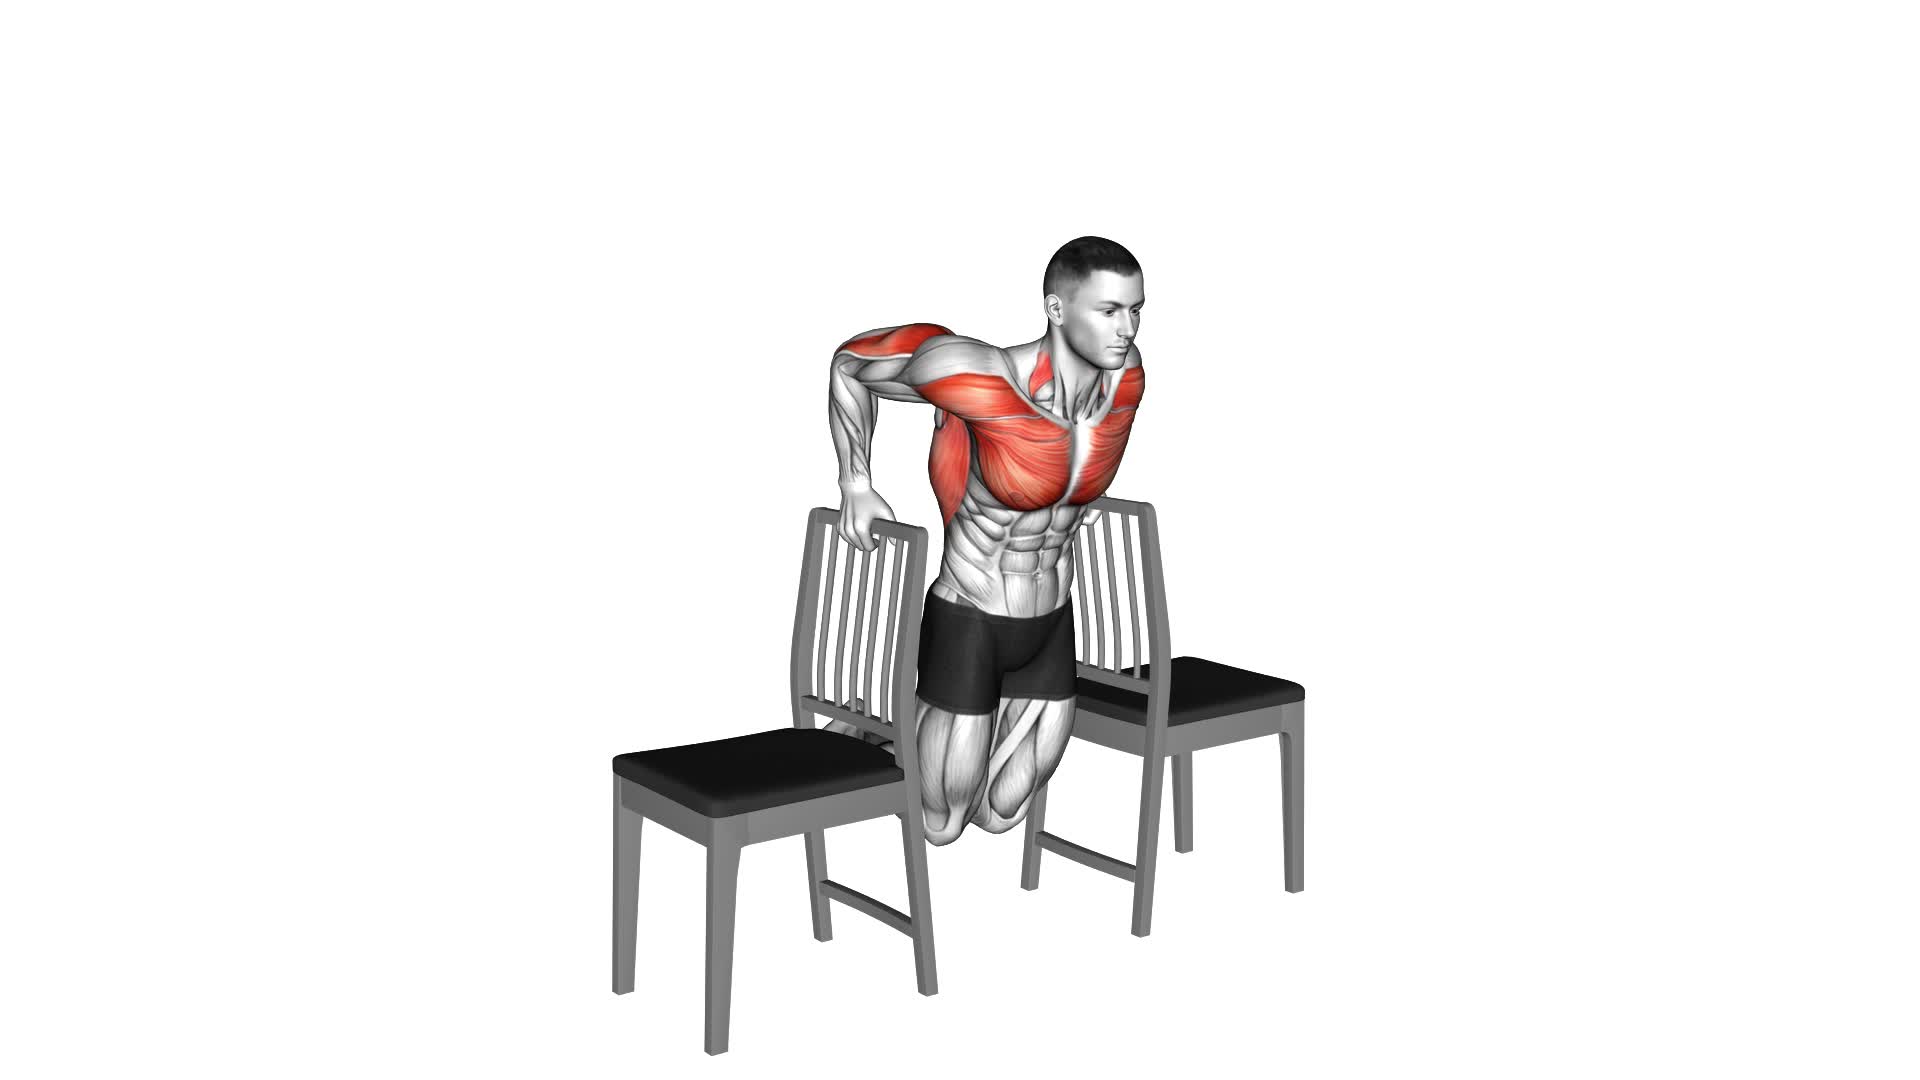 Dips Between Chairs - Video Exercise Guide & Tips